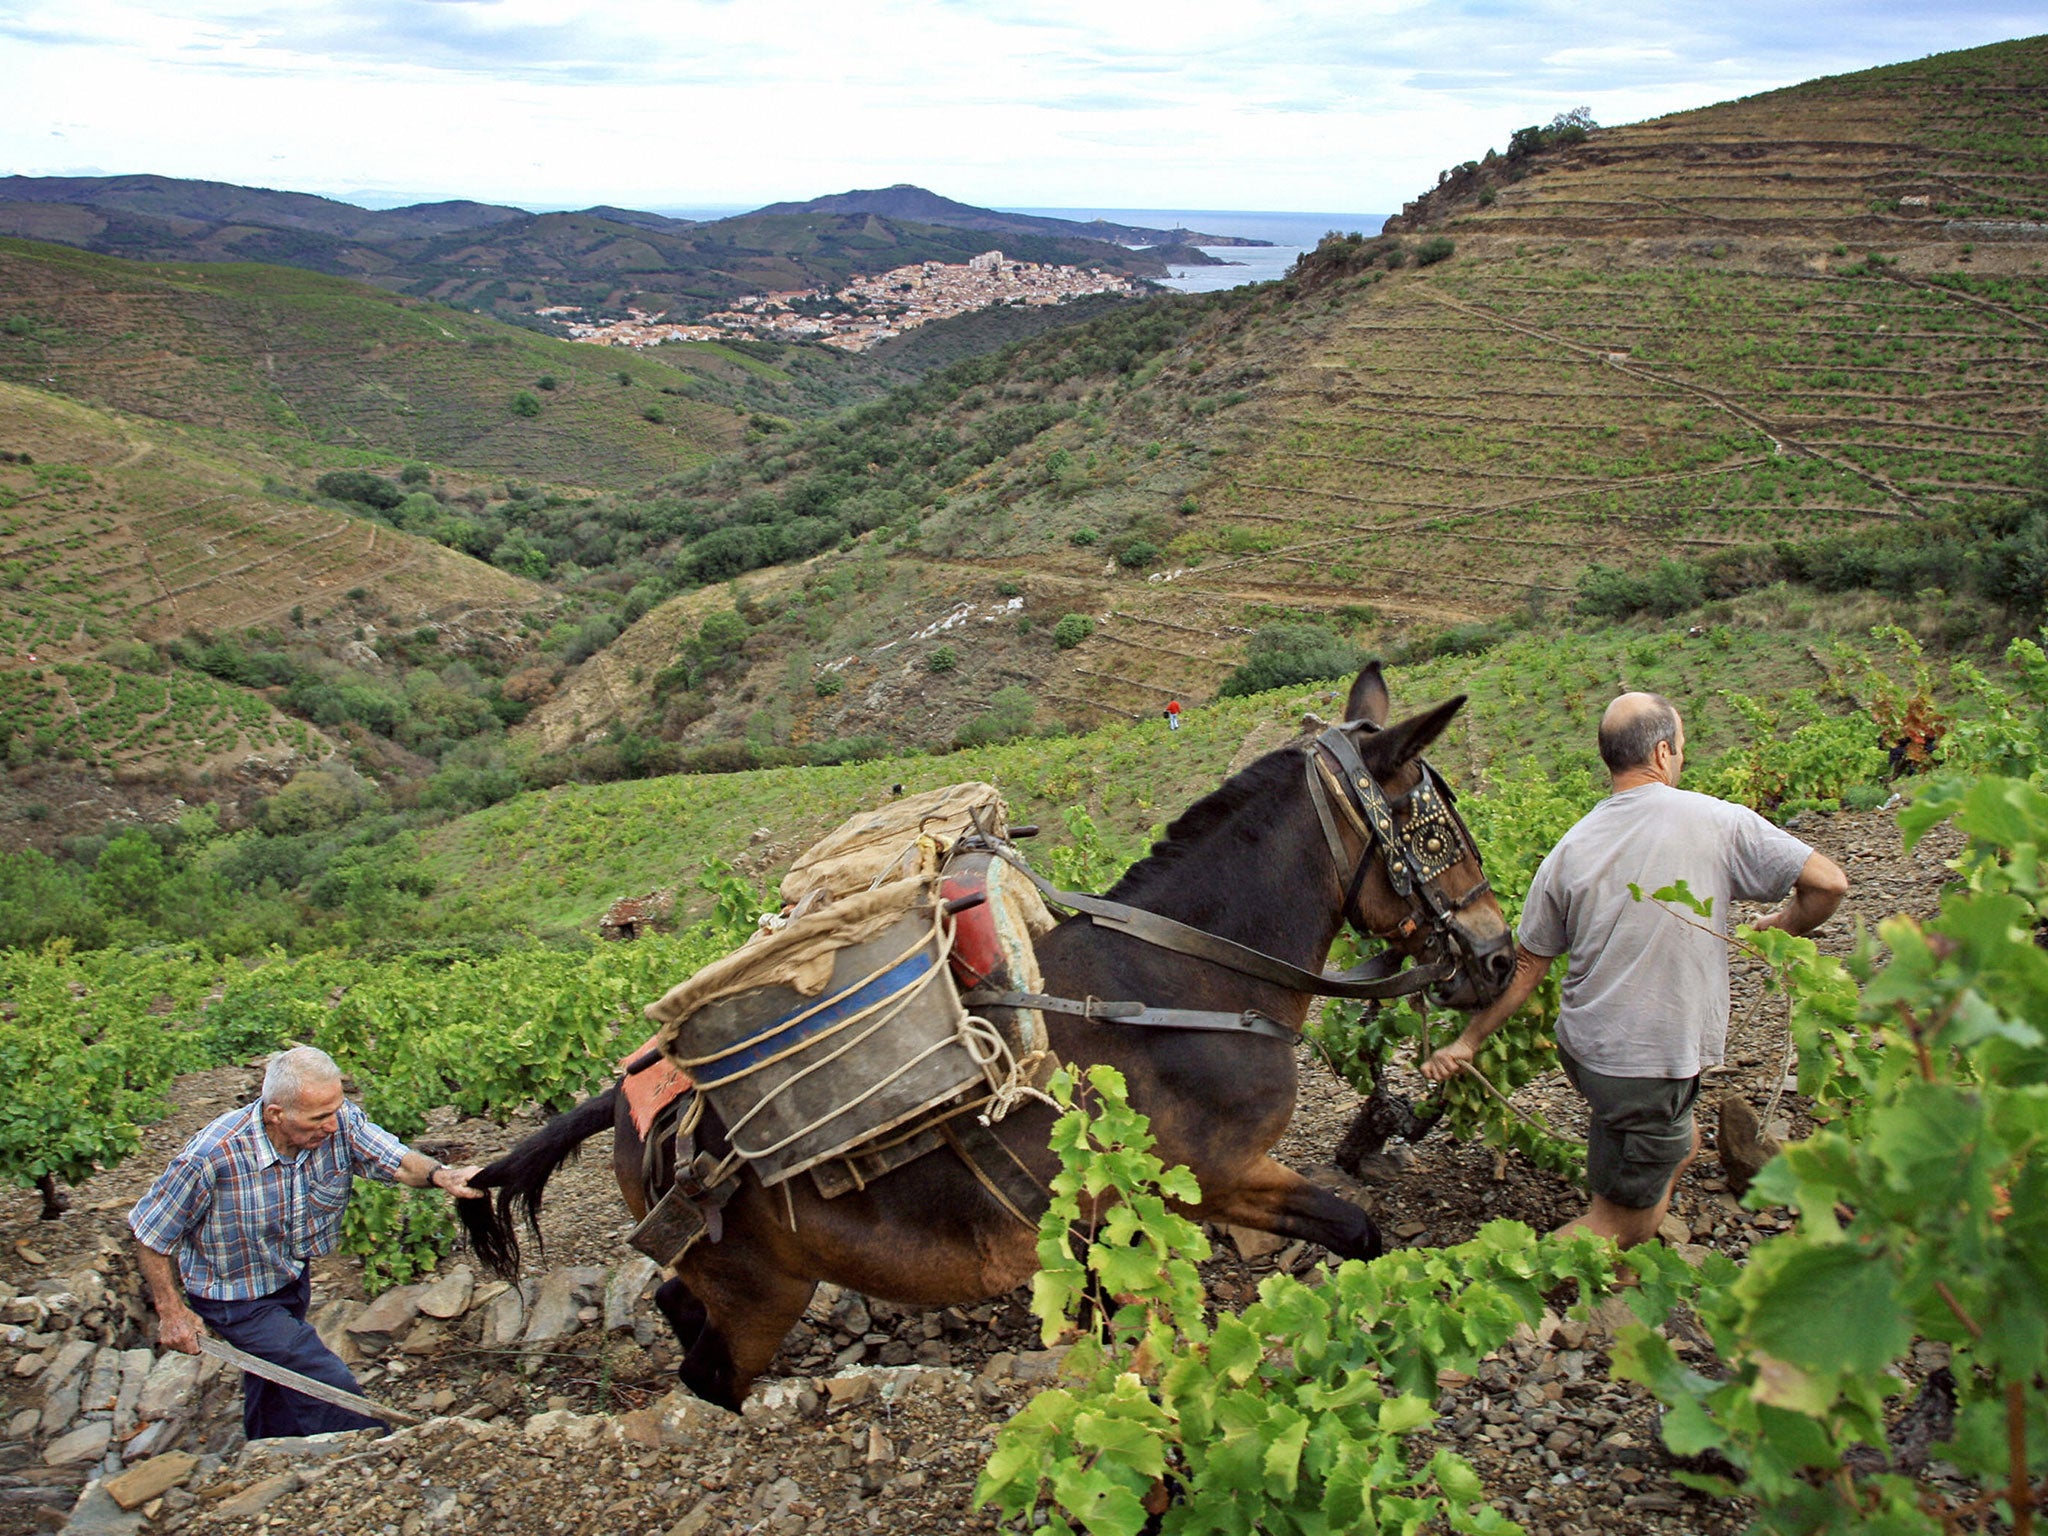 Harvesting the old way on the steep slopes at Banyuls Sur Mer in south-western France